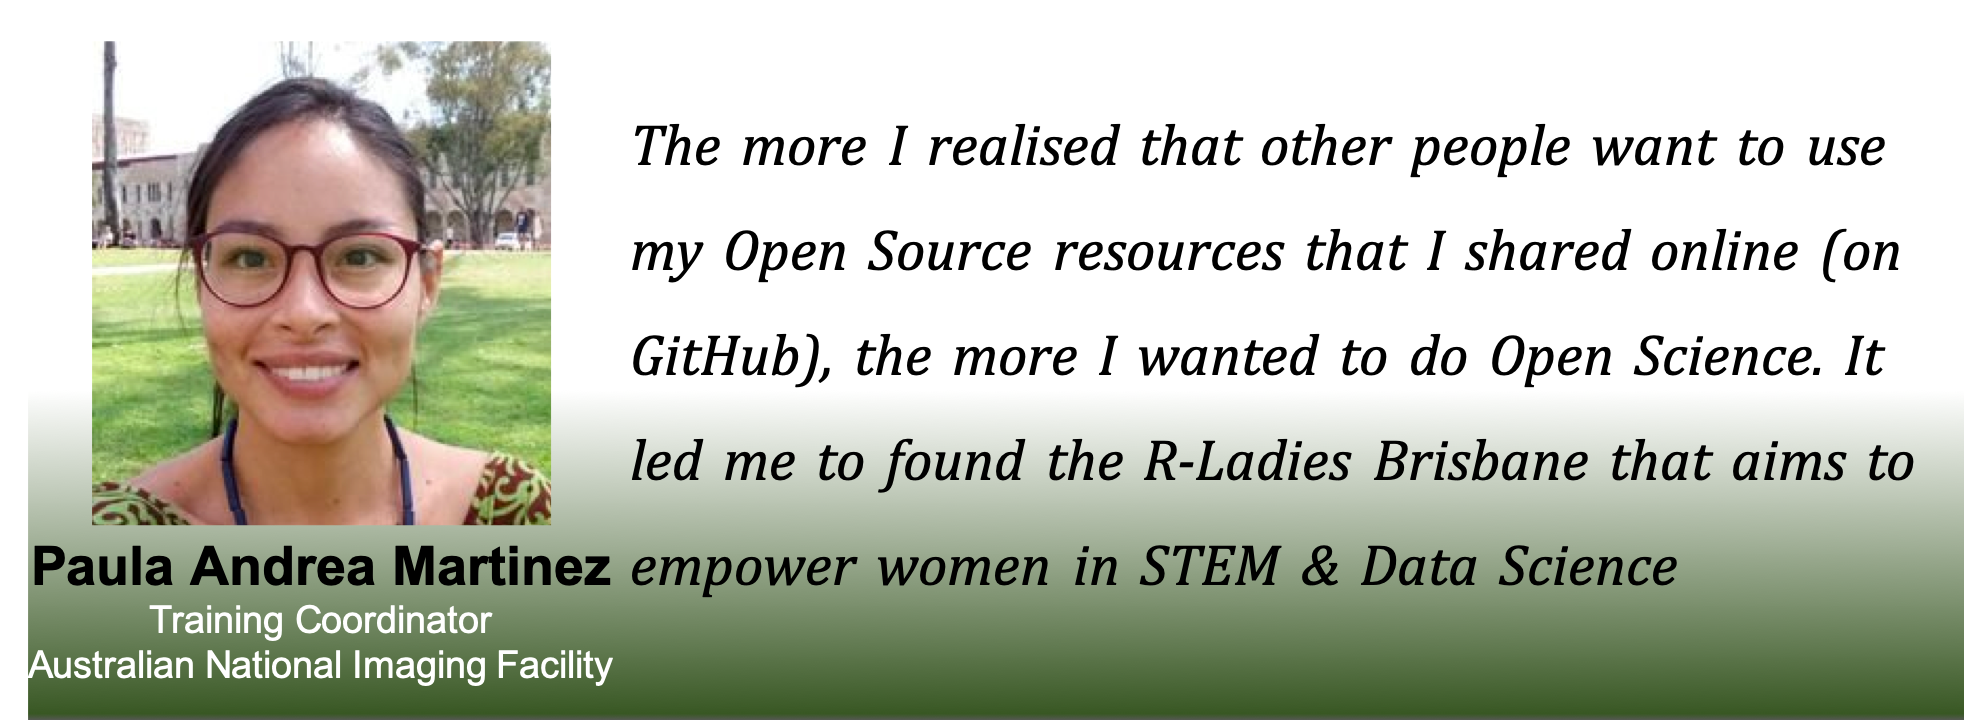 Picture of Paula with the caption: The more I realised that other people wanted to use me Open Source resources online (on GitHub), the more i wanted to do open science. IT led me to ofund the R-Ladies Brisbane, that aims to empower women in STEM and data science.